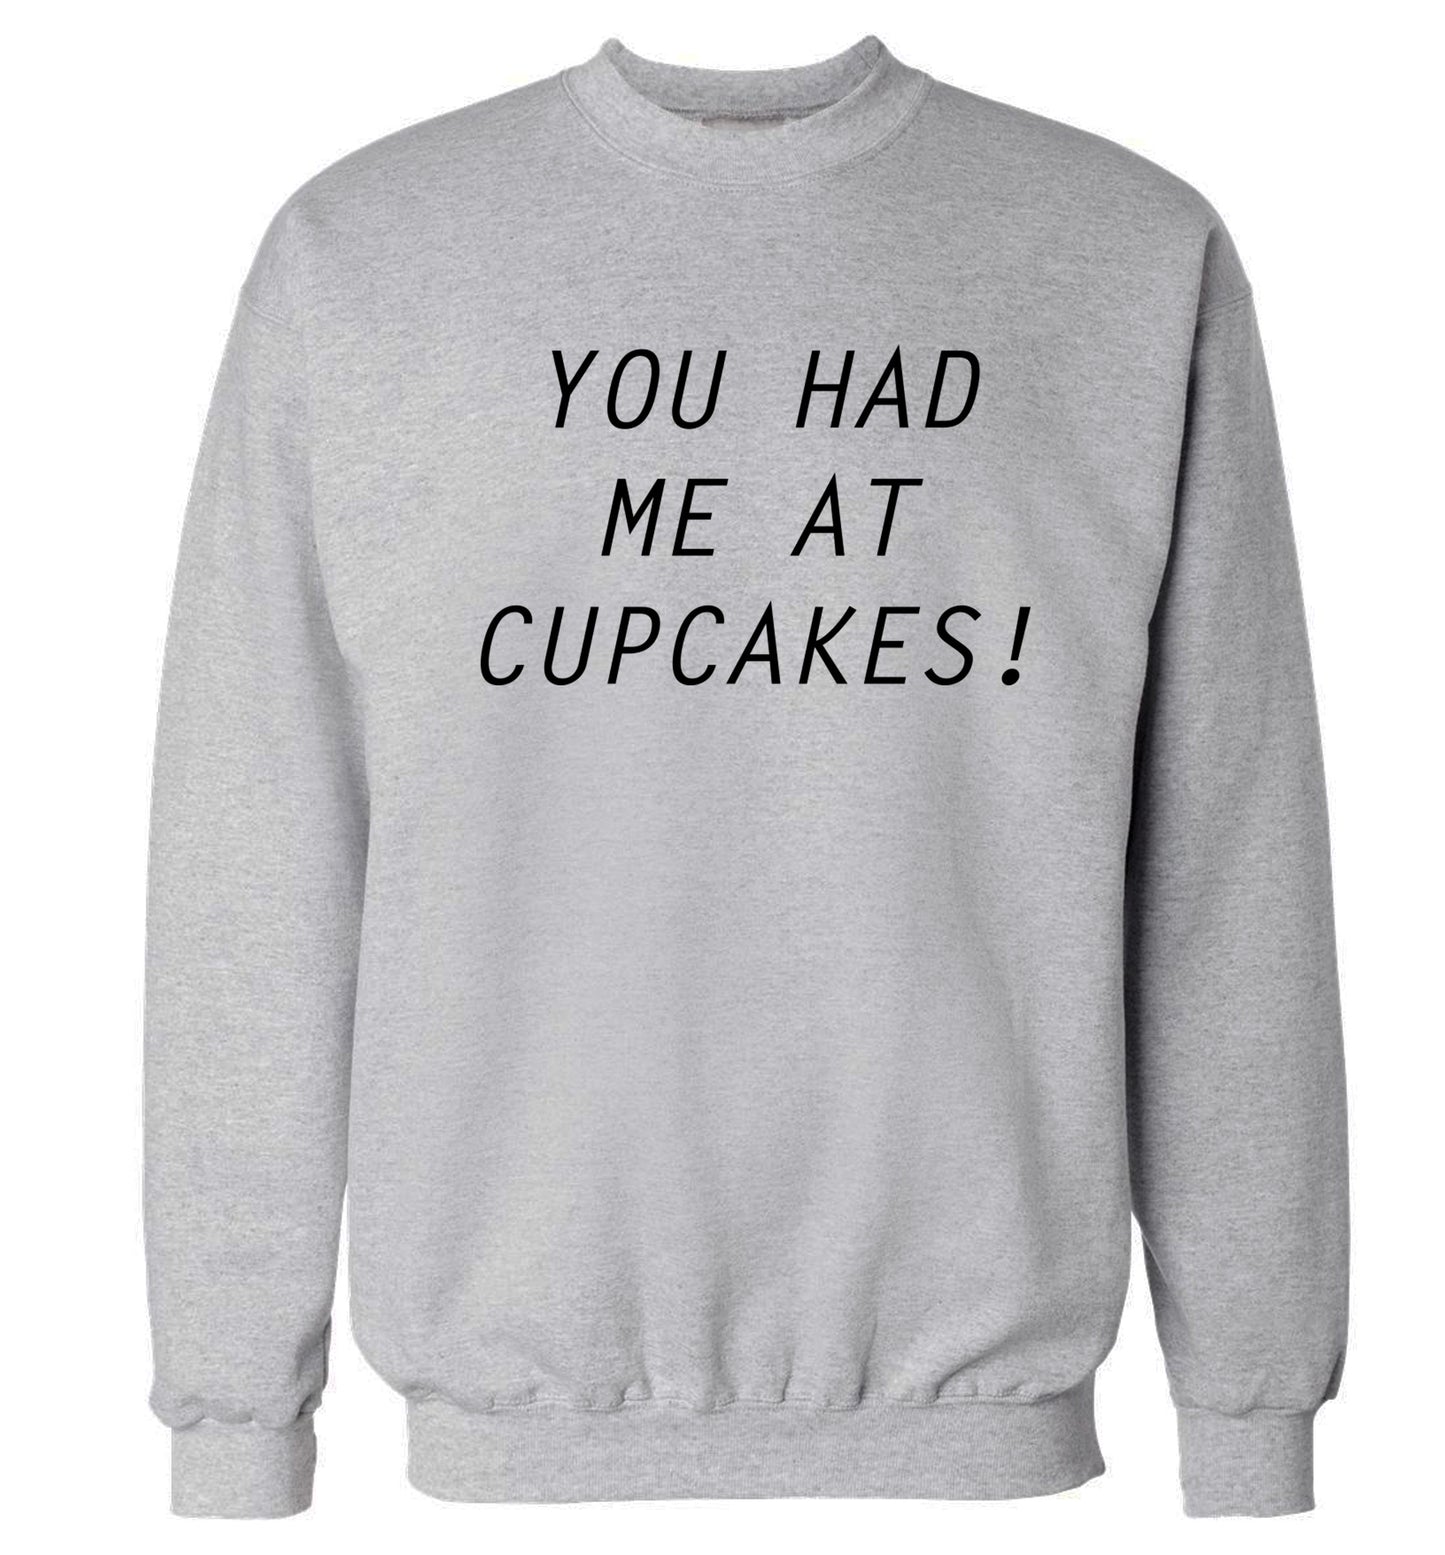 You had me at cupcakes Adult's unisex grey Sweater 2XL